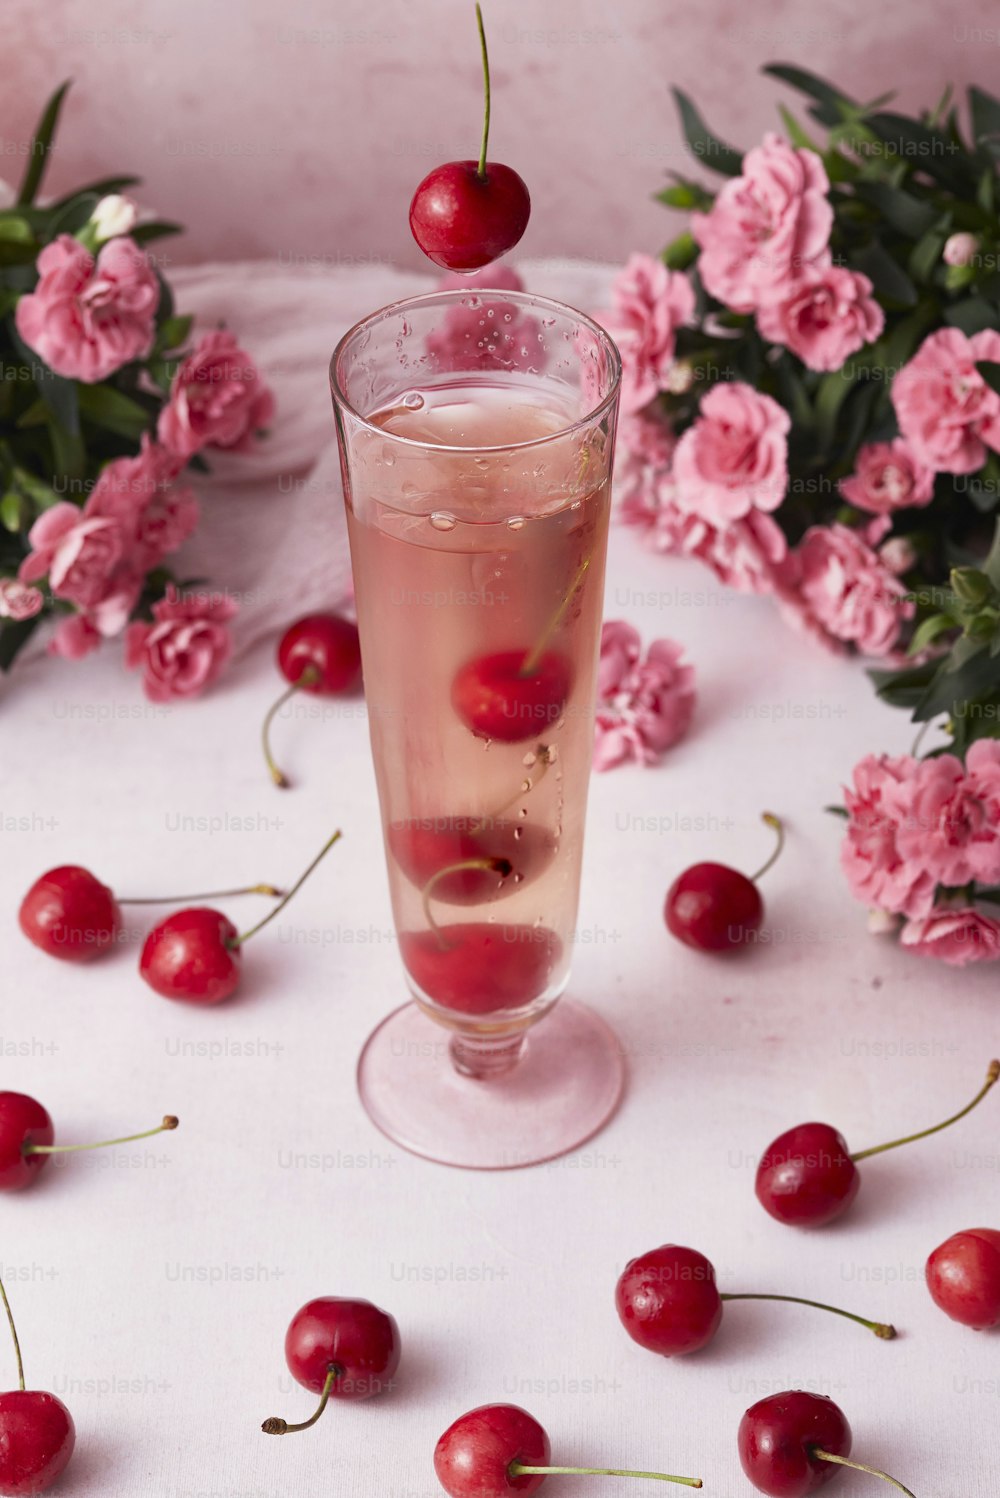 a glass filled with liquid and cherries on a table